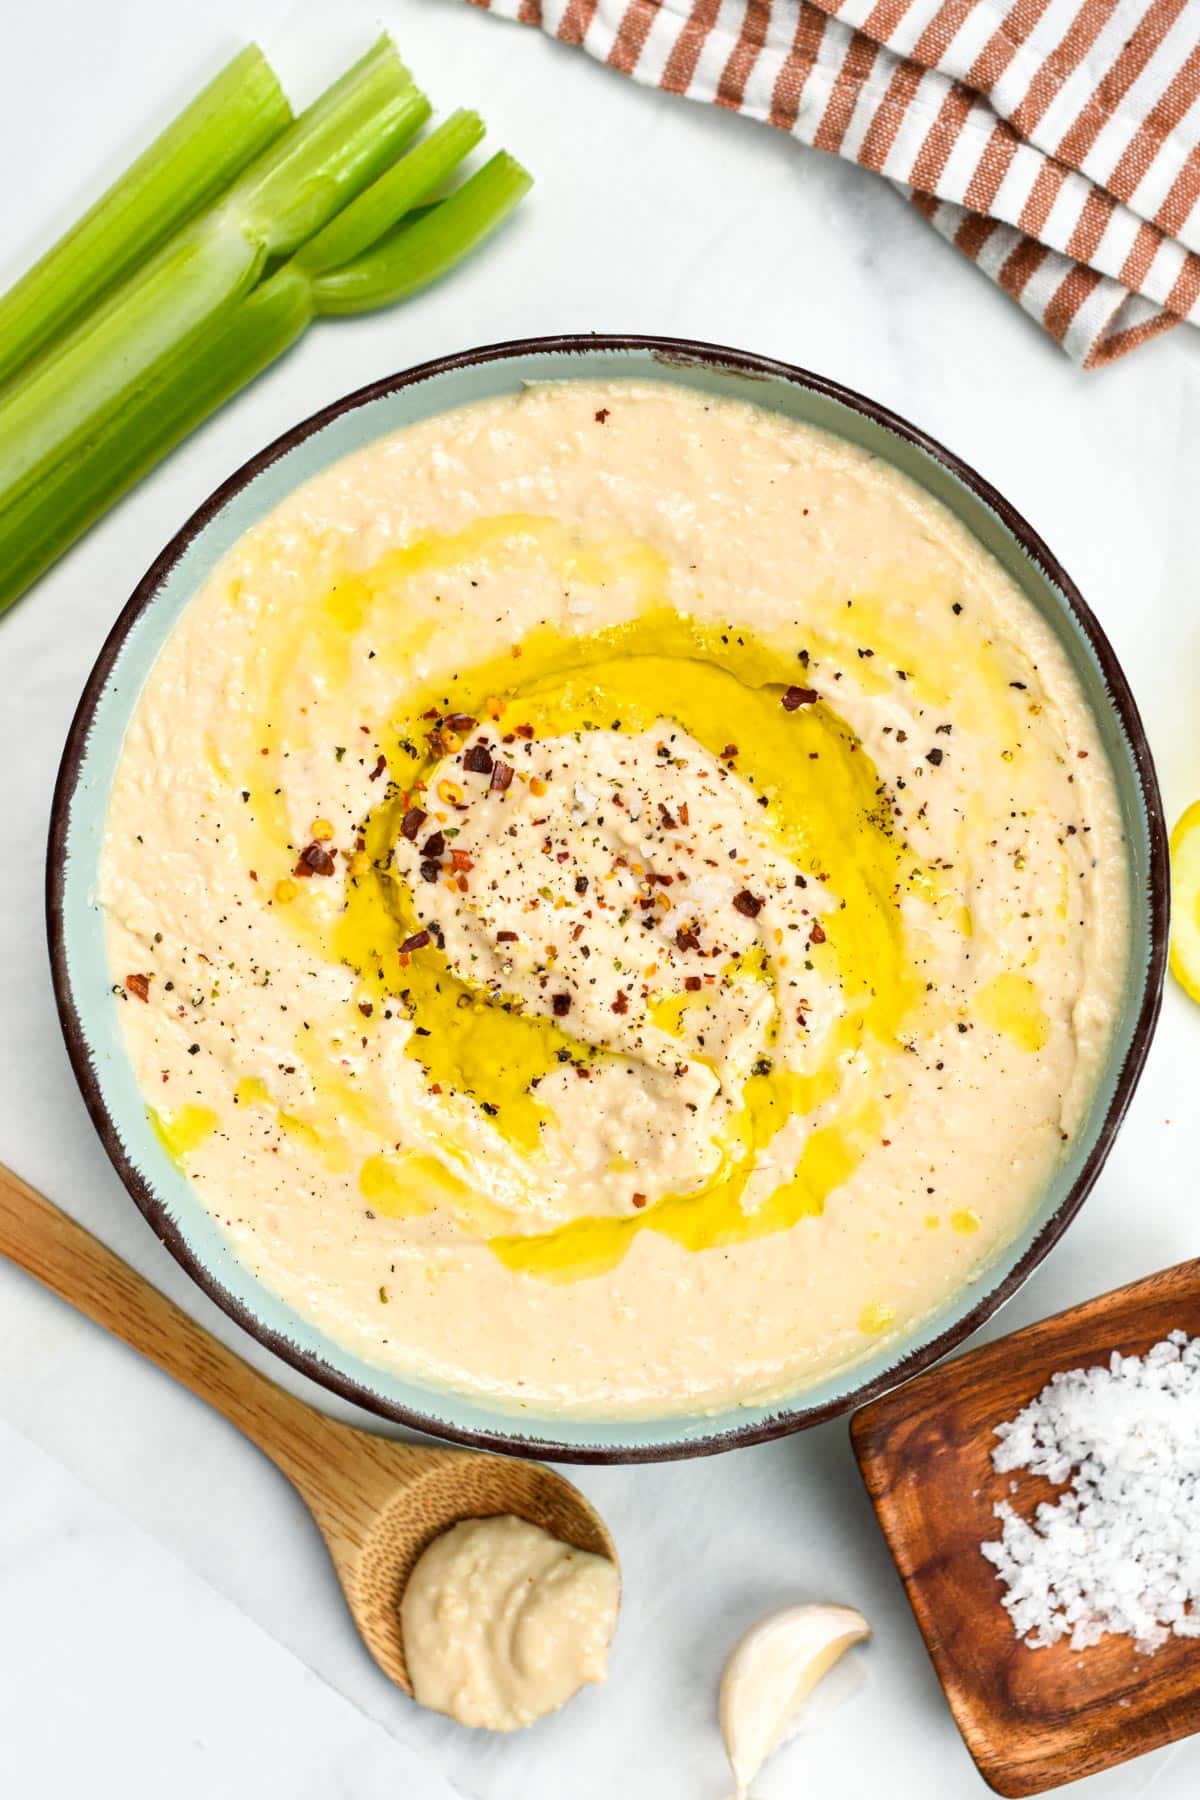 This White Bean Hummus aka white bean dip is creamy with a rich garlic lemon flavors. It's made from white beans instead of chickpeas, which adds an ultra creamy texture to the dip.